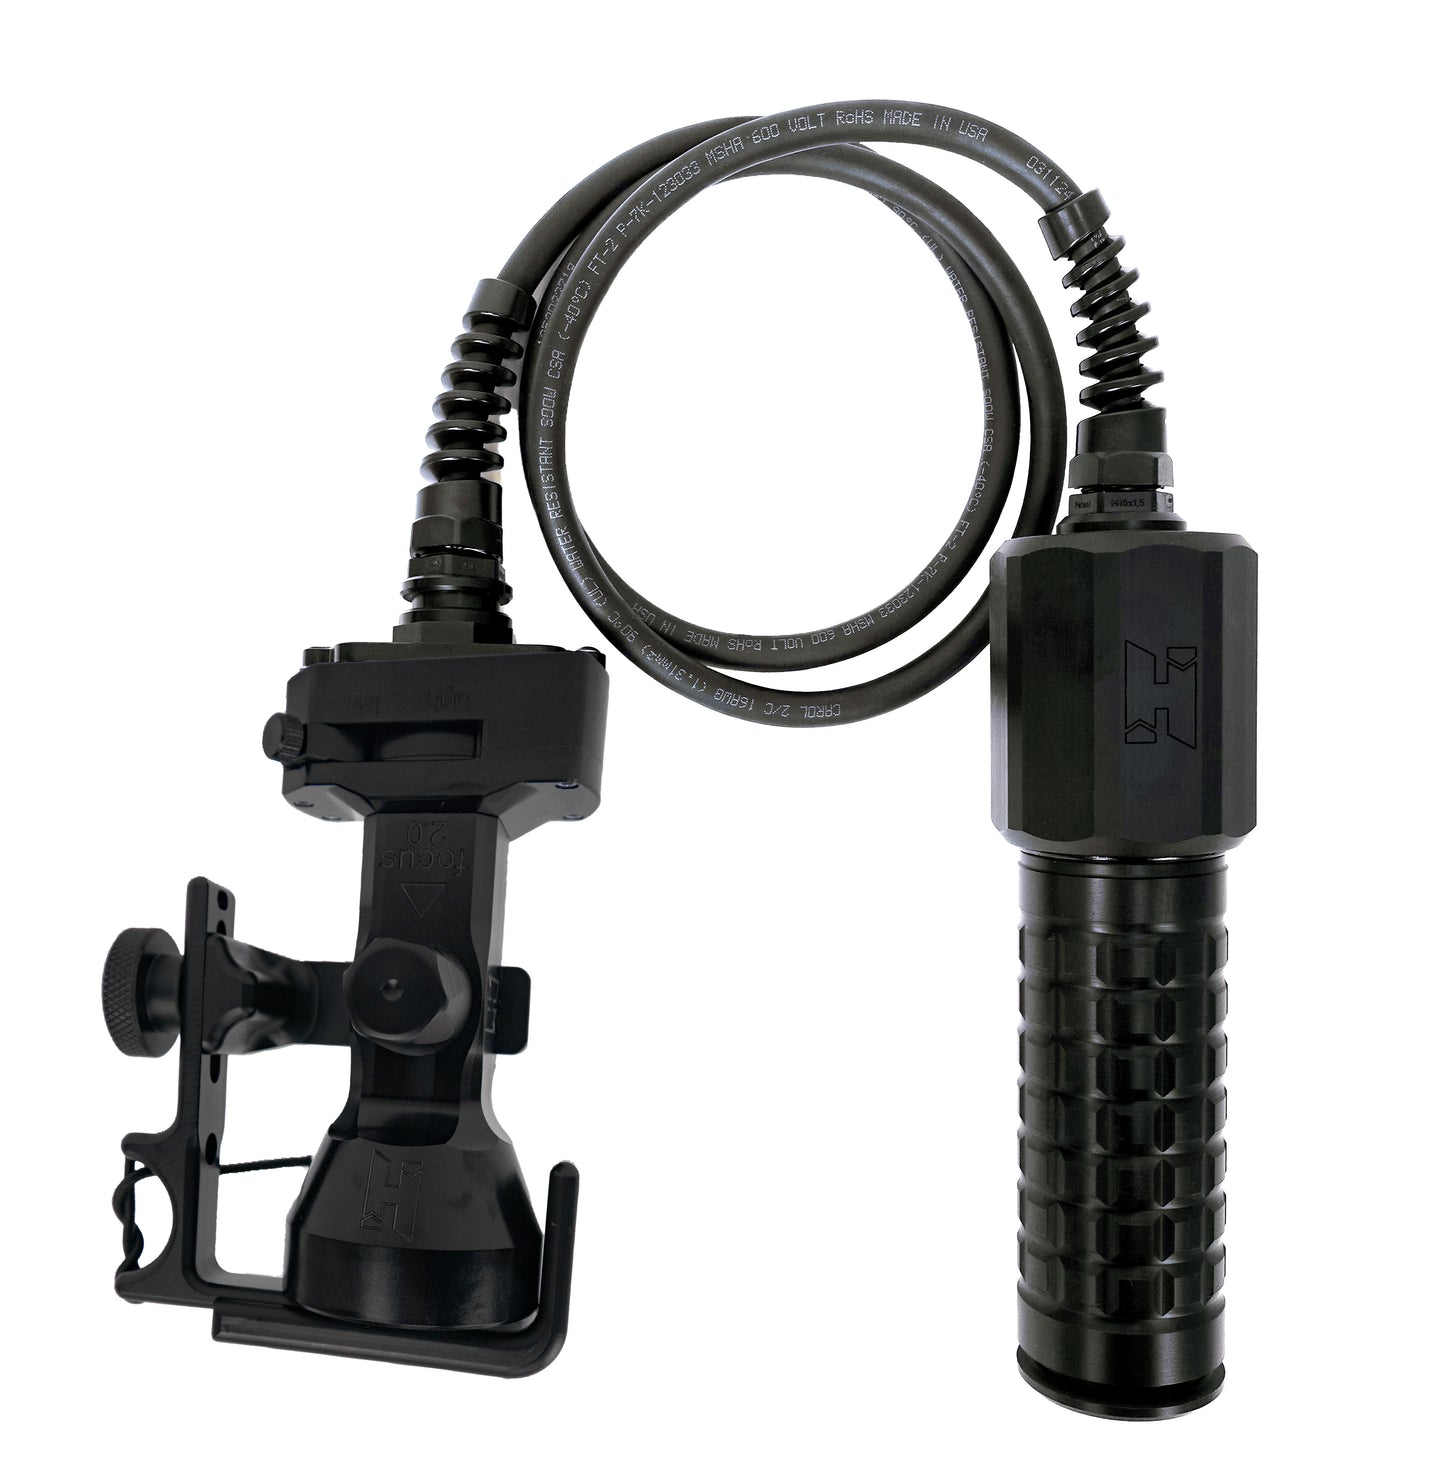 Halcyon Focus 2.0 Dive Light System - Cord or Handheld